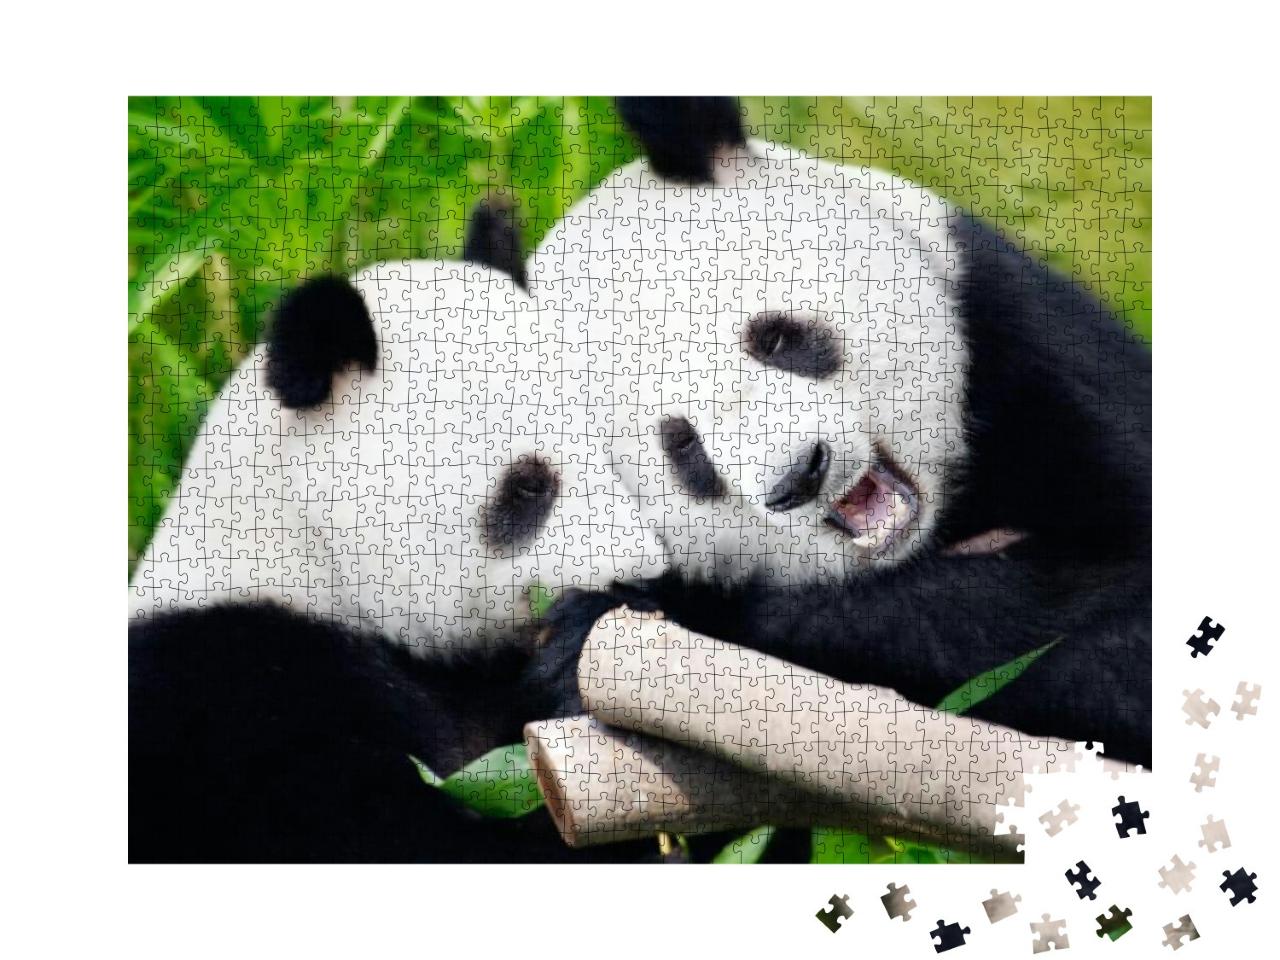 Couple of Cute Giant Pandas Eating Bamboo Shoots... Jigsaw Puzzle with 1000 pieces